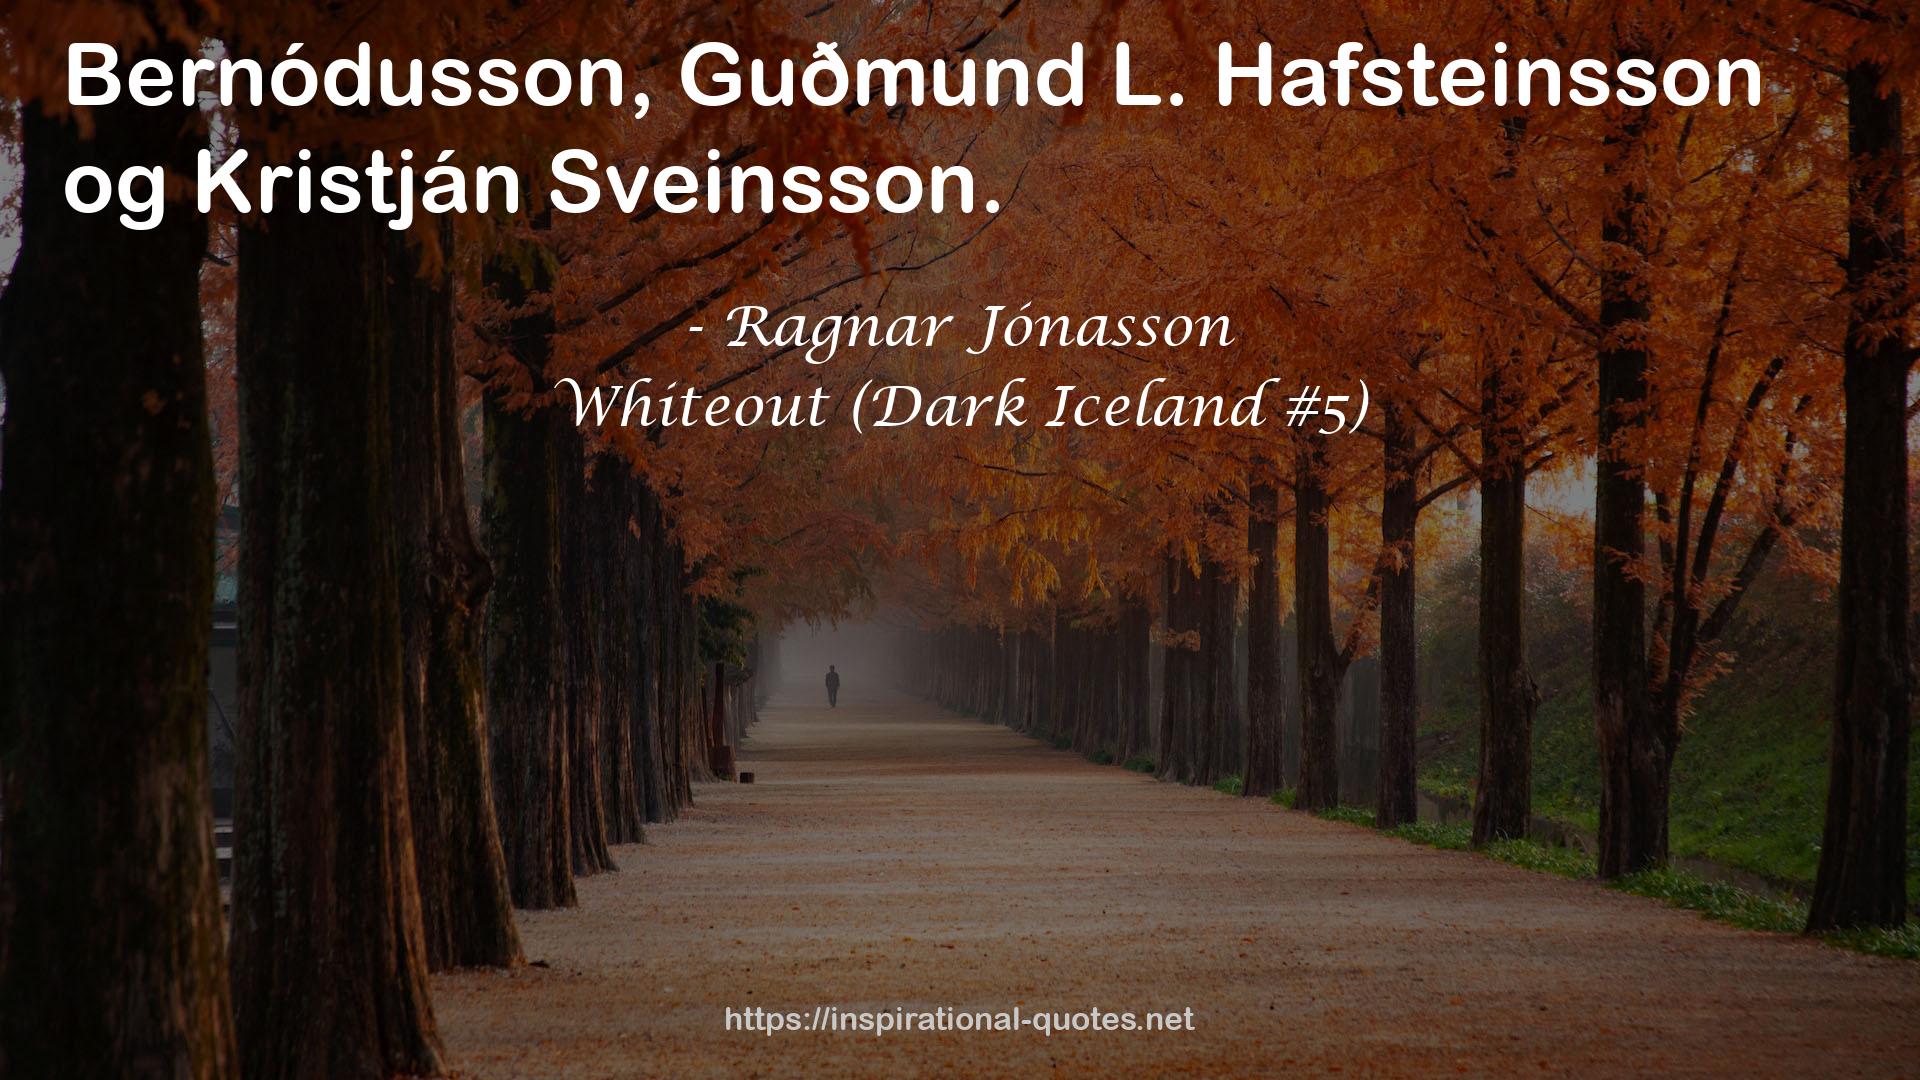 Whiteout (Dark Iceland #5) QUOTES